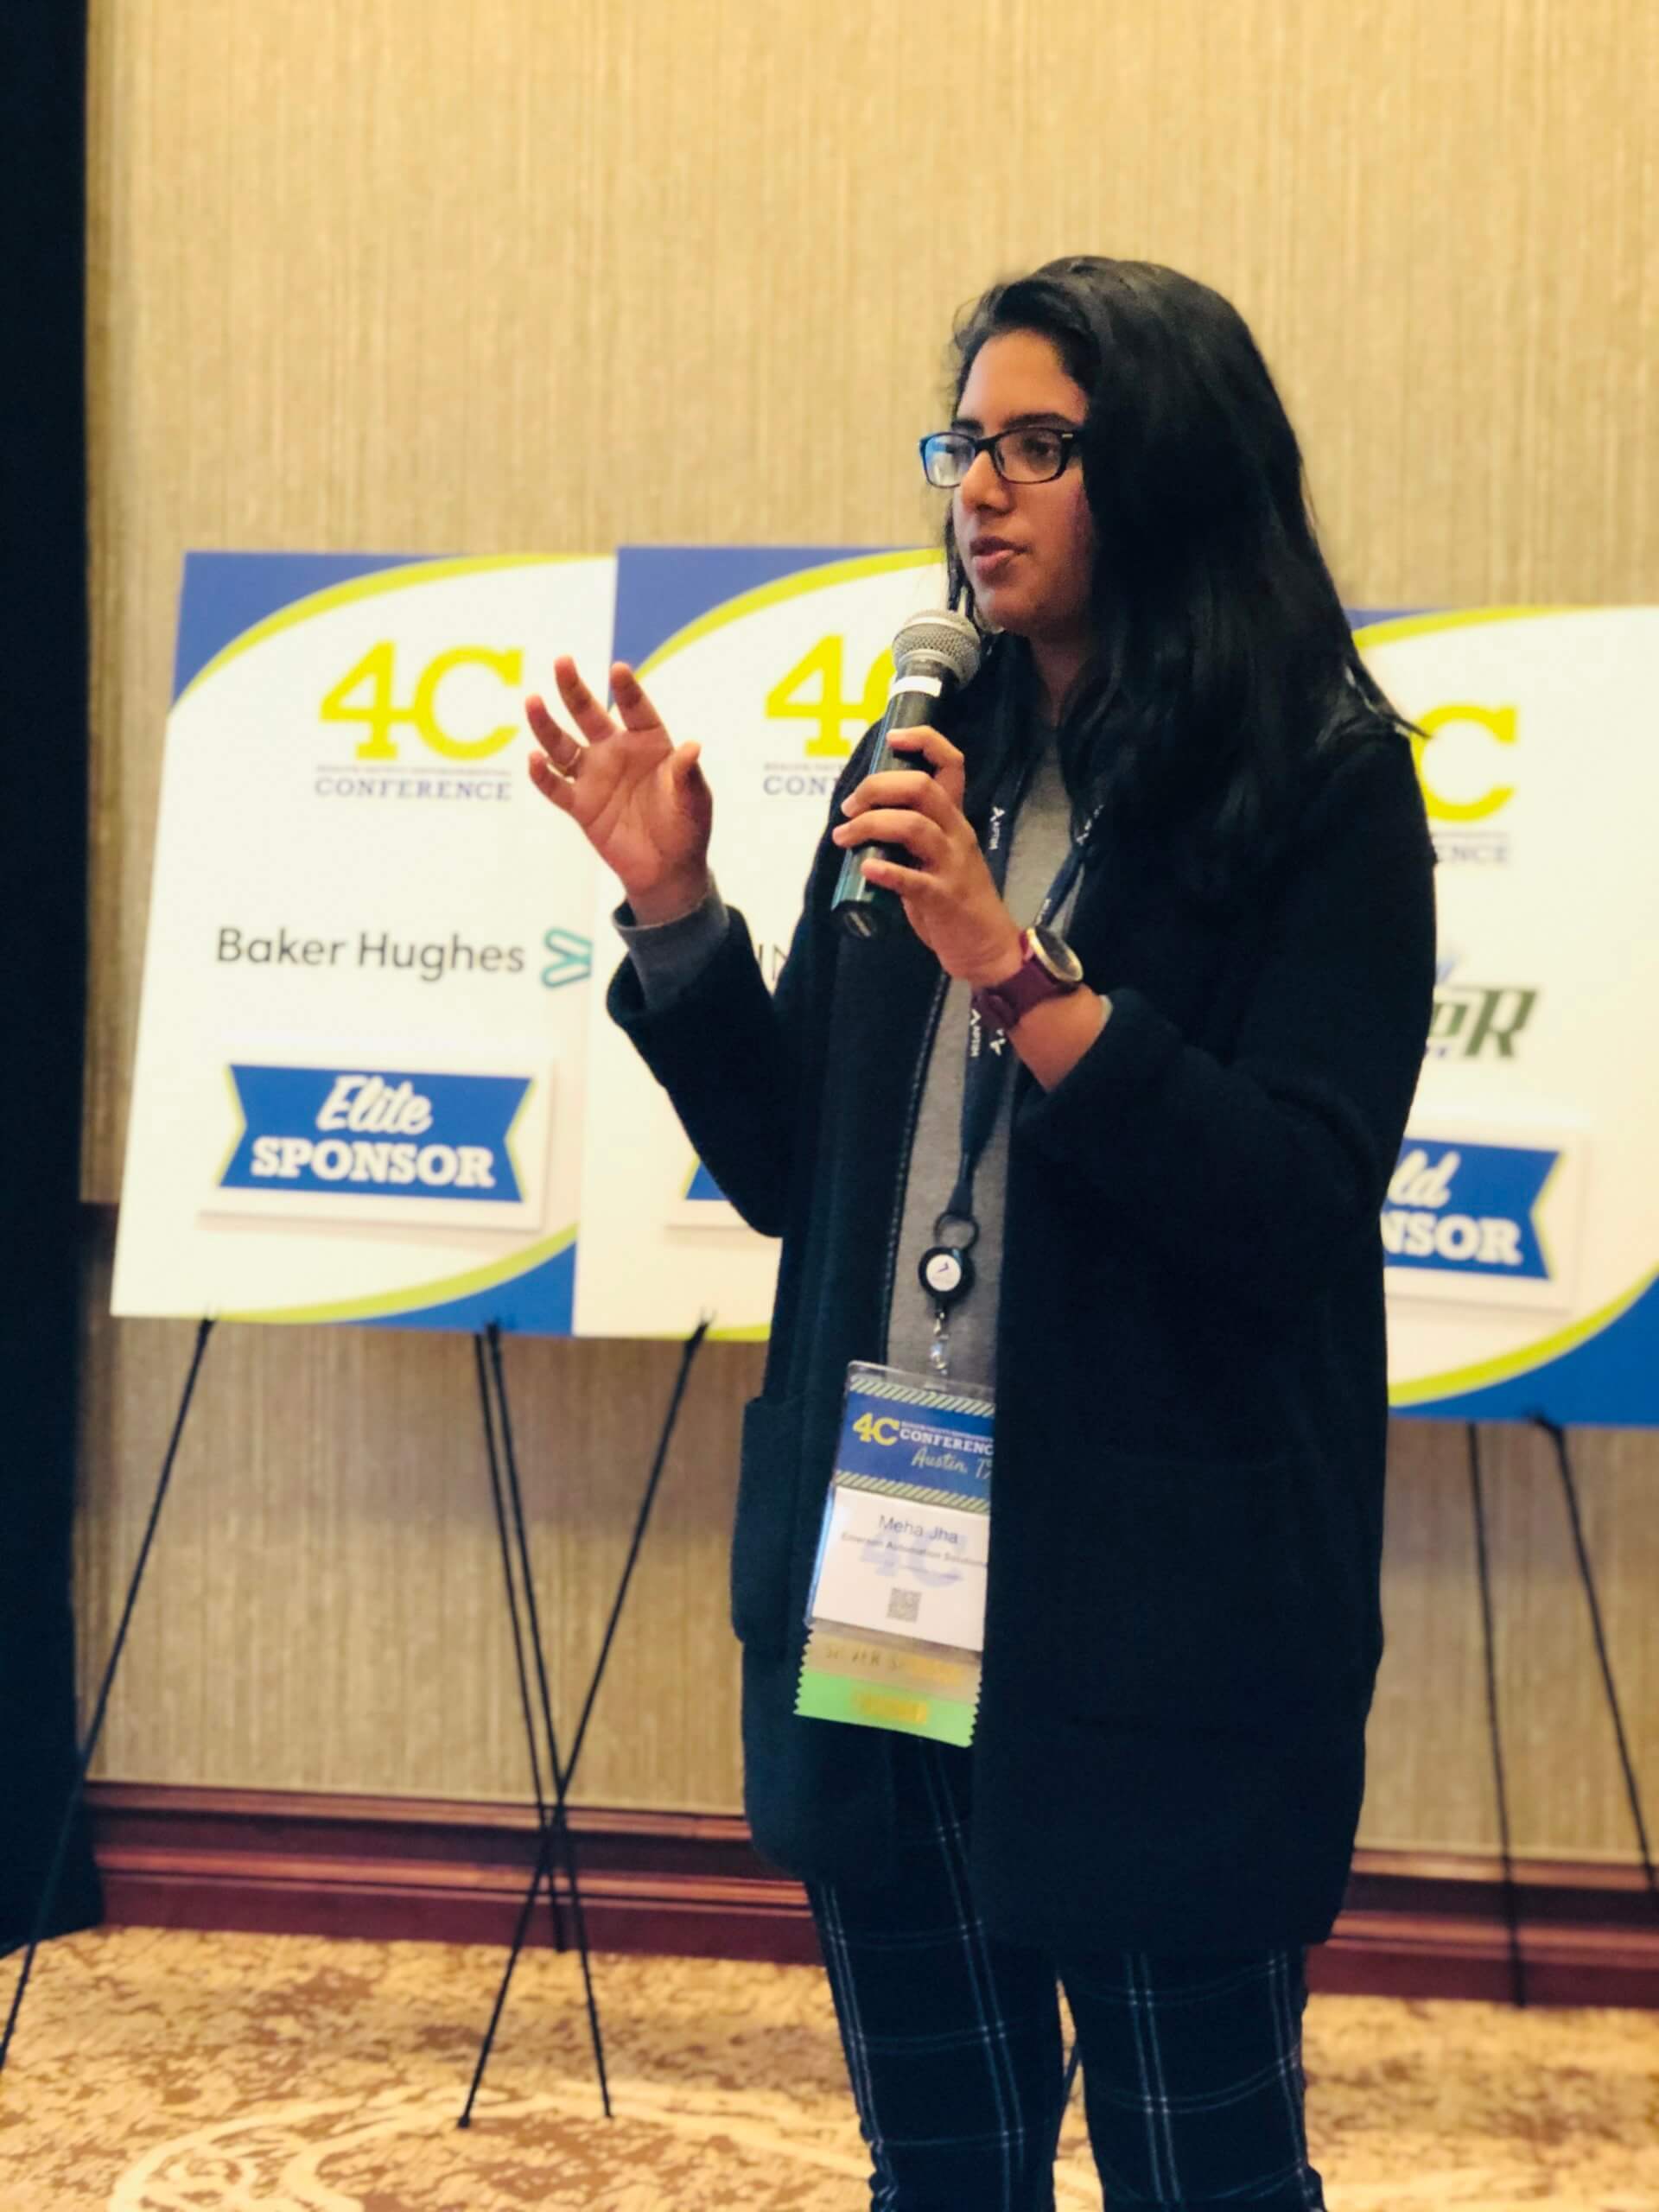 Emerson's Meha Jha at the 2020 4C HSE Conference